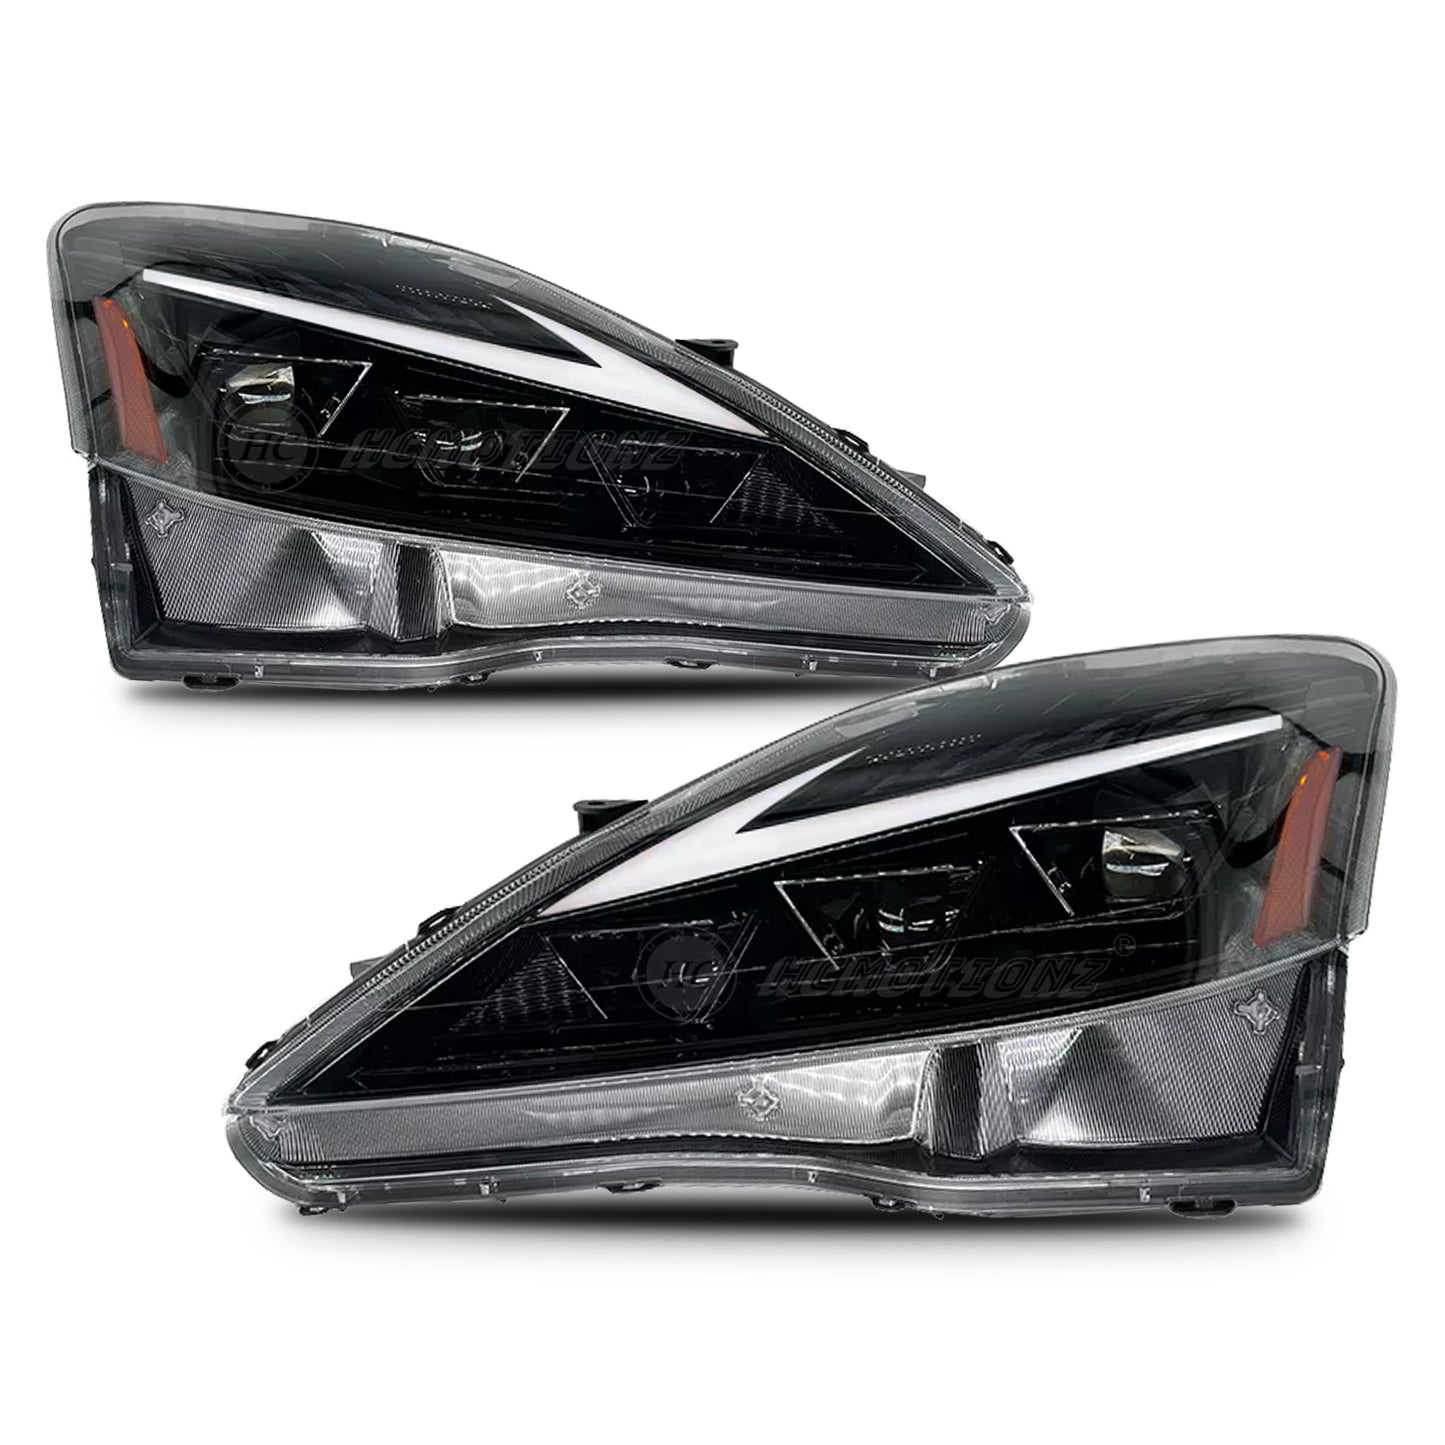 HCMOTION LED Head Light For Lexus IS250 IS350 C ISF 2006-2013